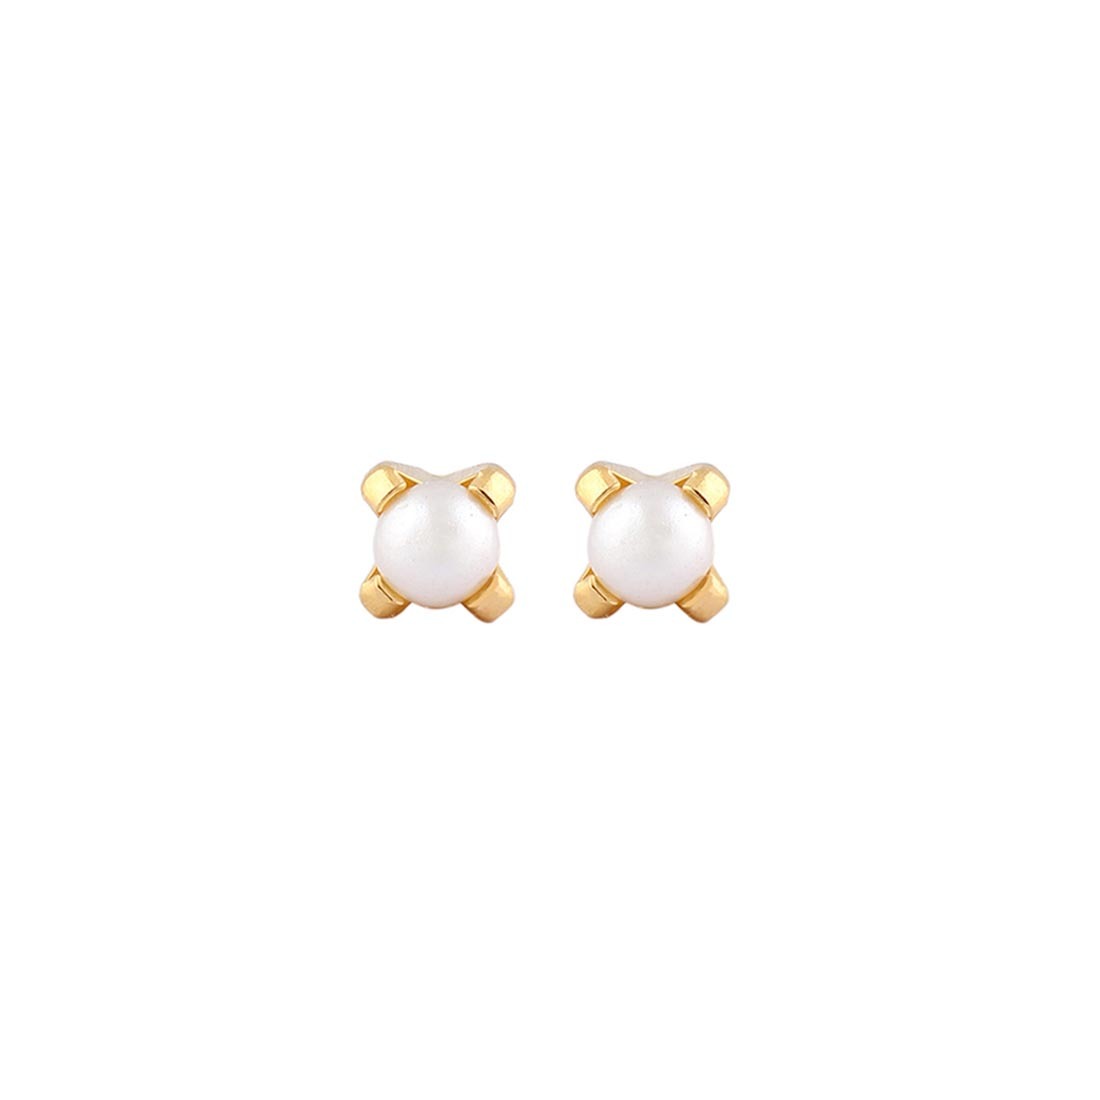 3MM - White Pearl (Round) | 24K Gold Plated Kids / Baby / Children’s Fashion Earrings | Studex Sensitive